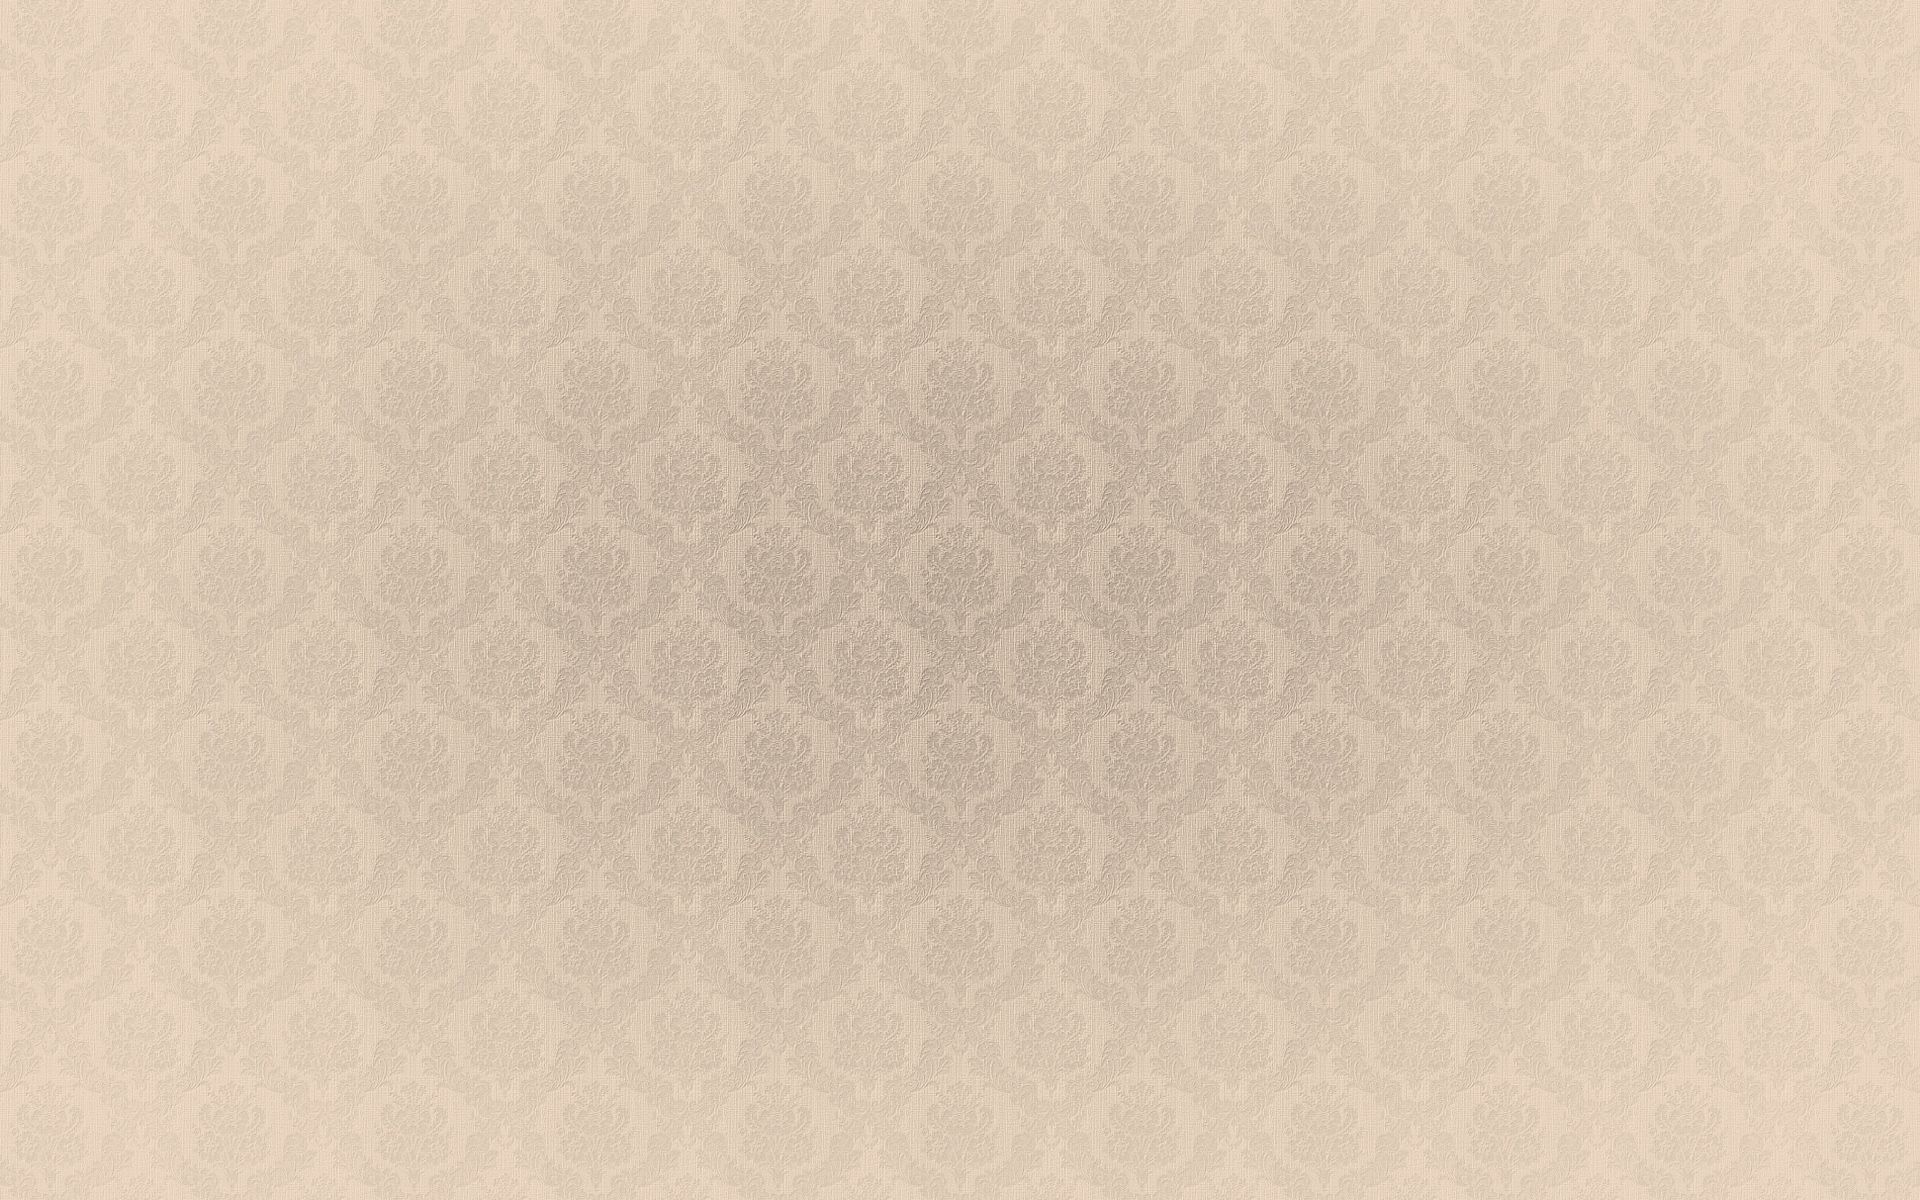 122744 download wallpaper light coloured, background, patterns, light, texture, textures, symmetry screensavers and pictures for free